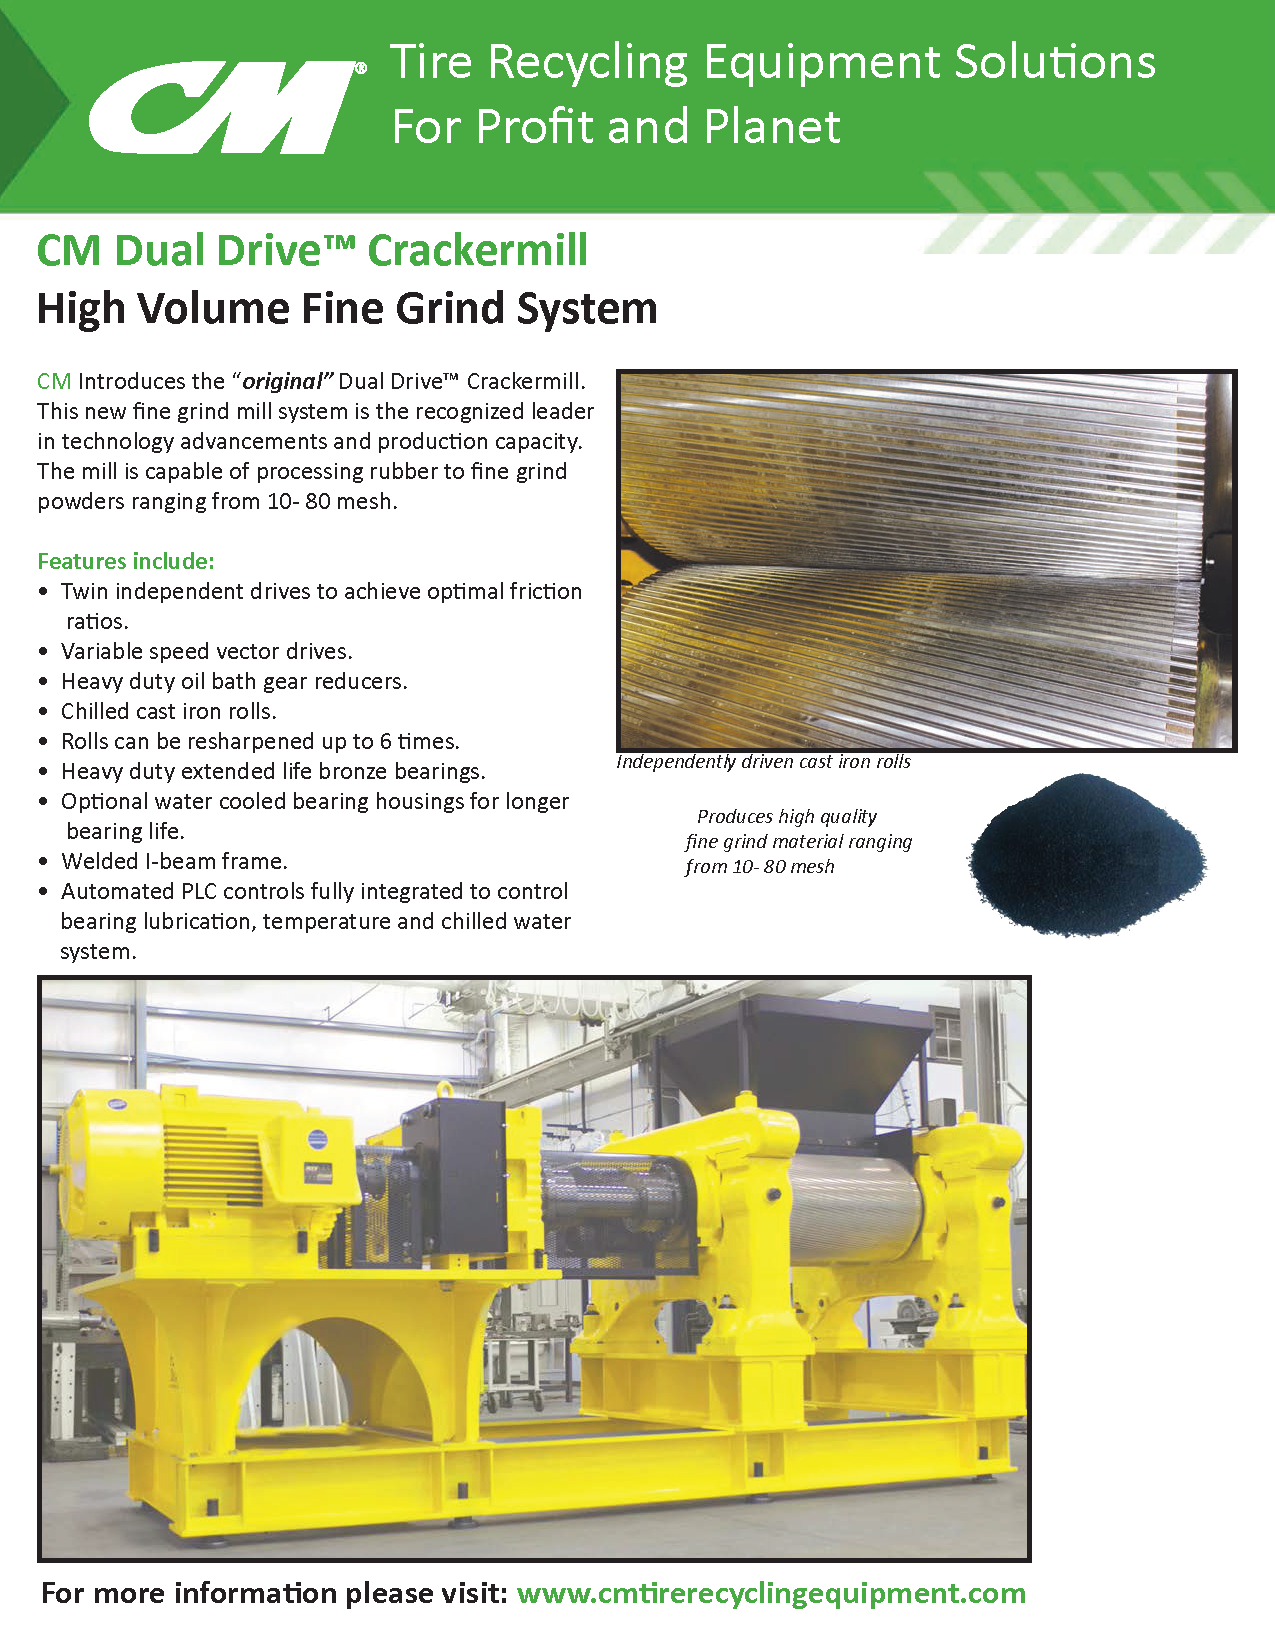 Learn more by viewing the CM Dual Drive Crackermill Brochure. 